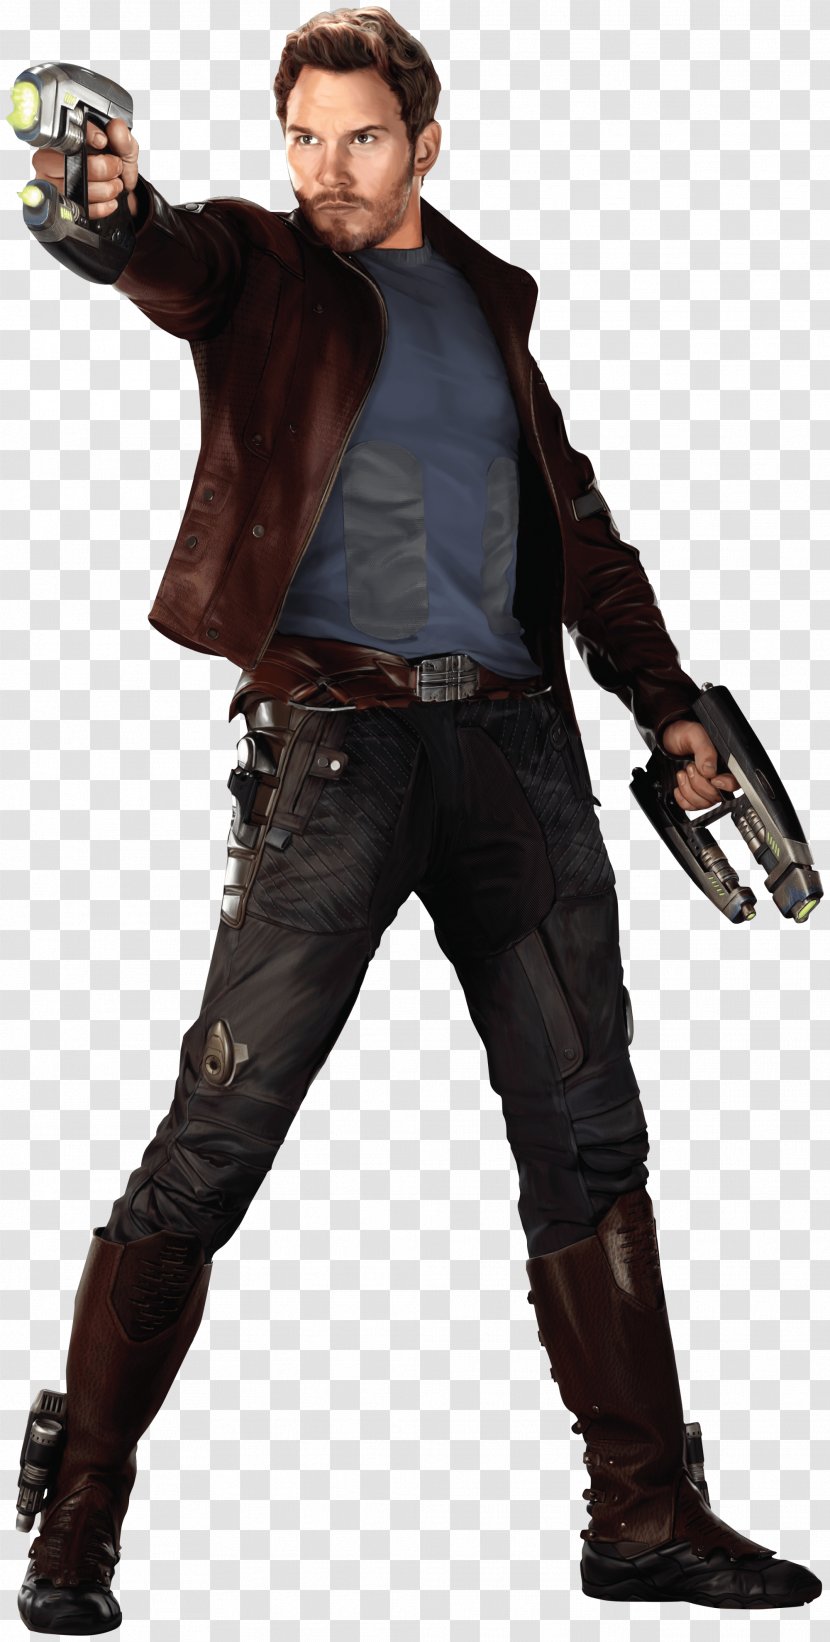 Chris Pratt Marvel: Avengers Alliance Star-Lord Guardians Of The Galaxy Black Panther - Drax Destroyer - Pine Clipart Transparent PNG